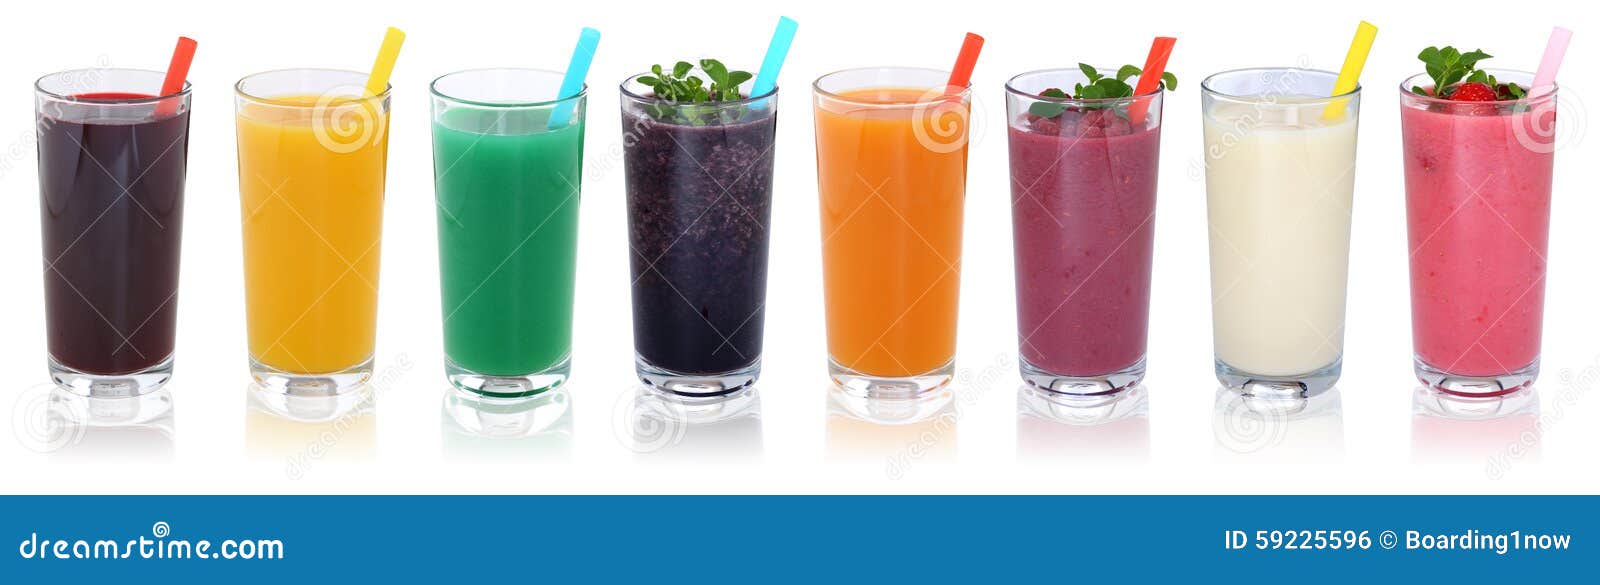 smoothie fruit juice smoothies drinks with fruits in a row isola